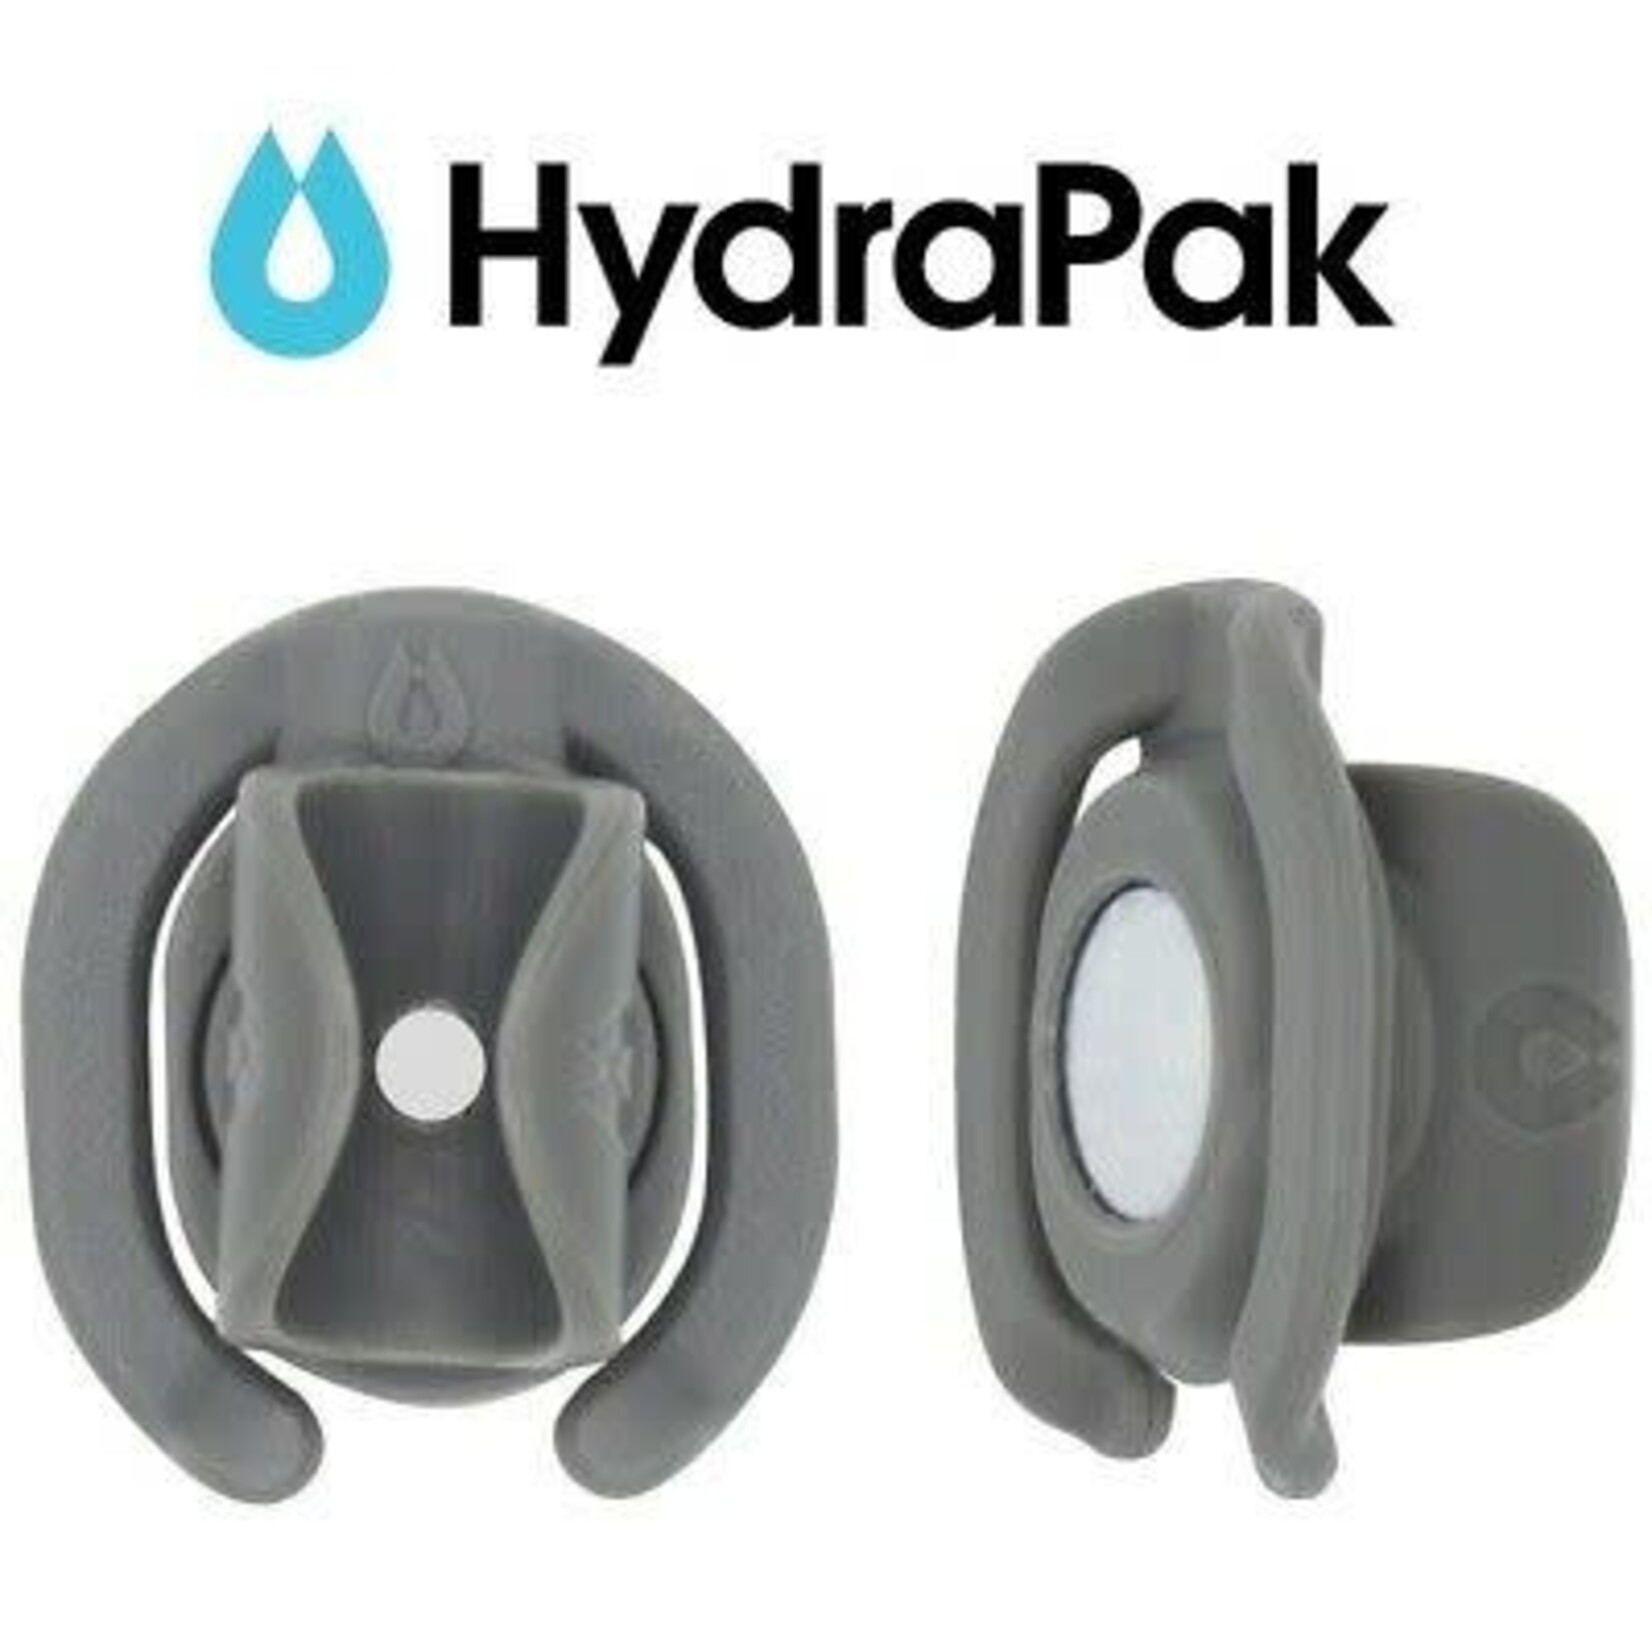 HydraPak Aimants Tube Magnet Accessory